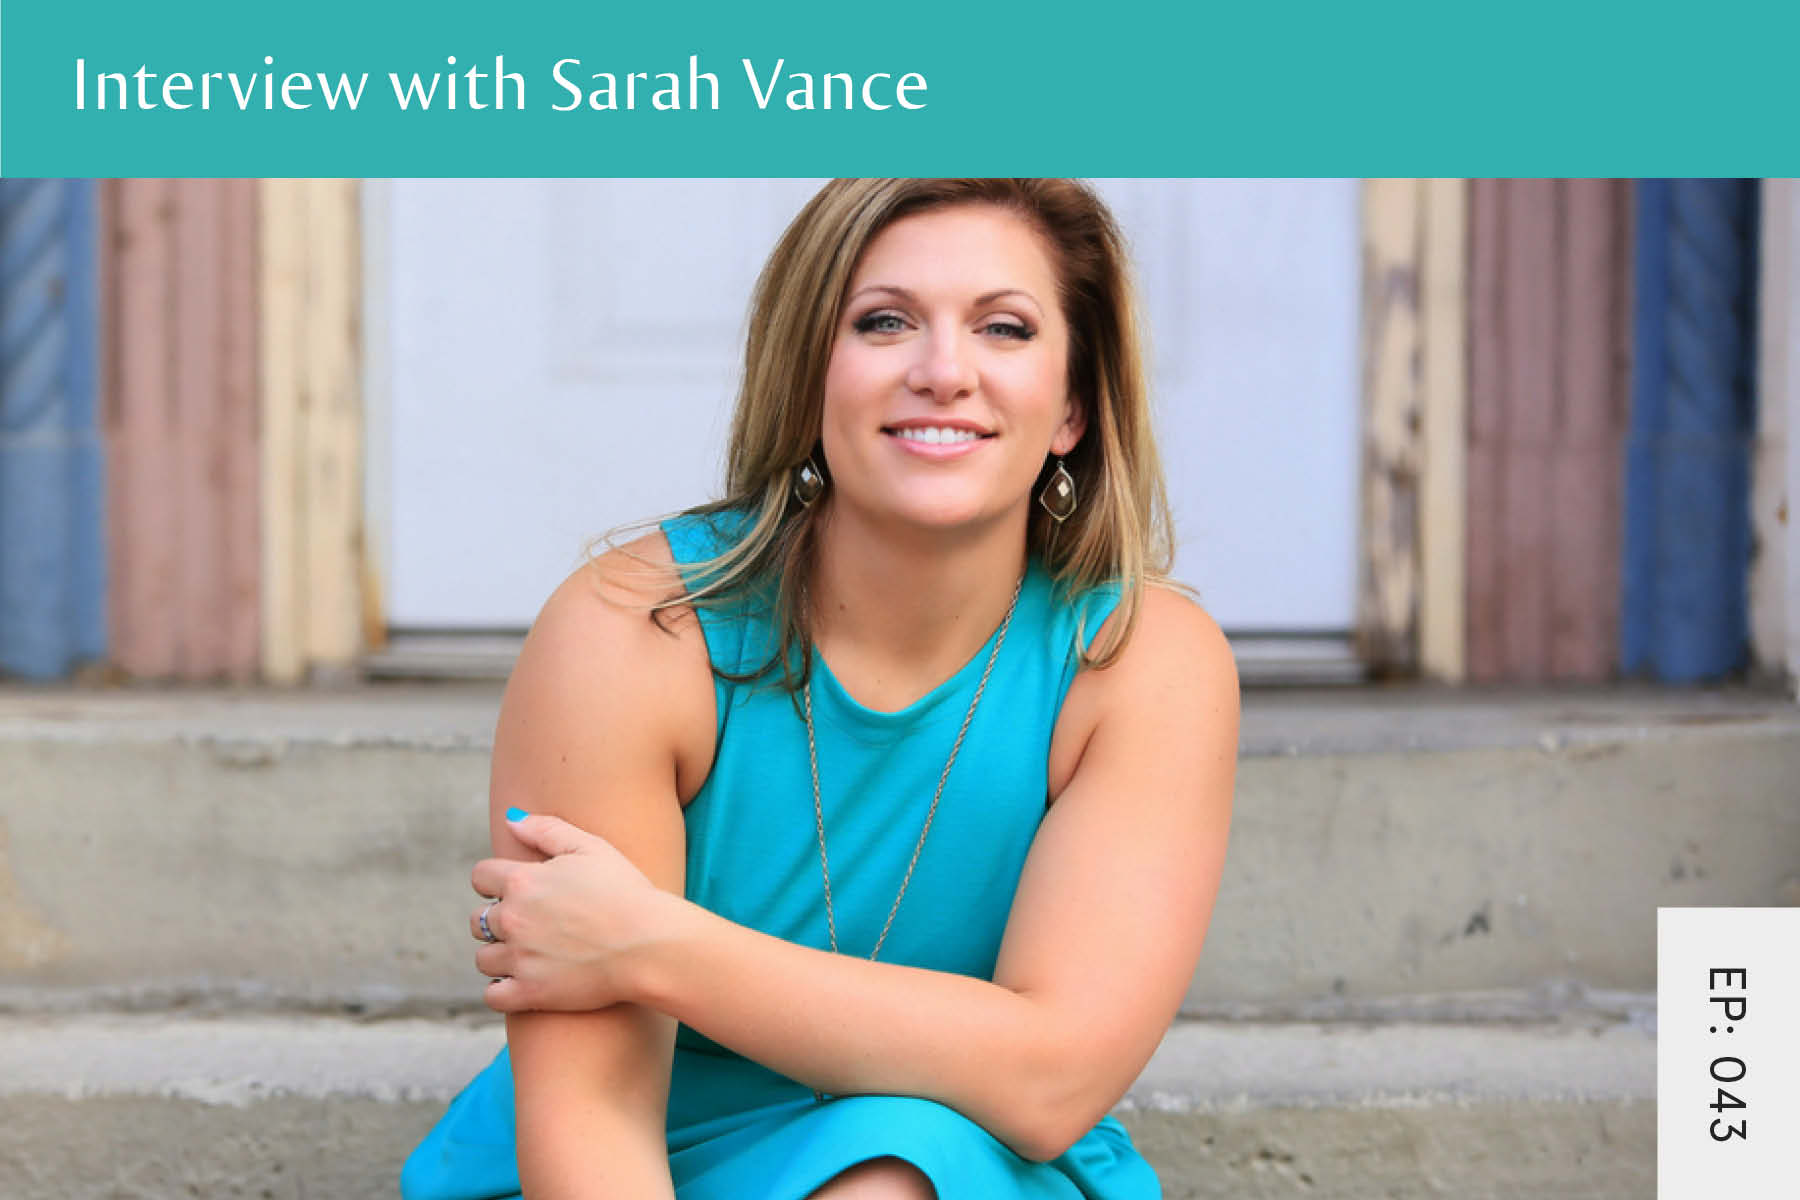 043: Interview with Sarah Vance - Seven Health: Eating Disorder Recovery and Anti Diet Nutritionist